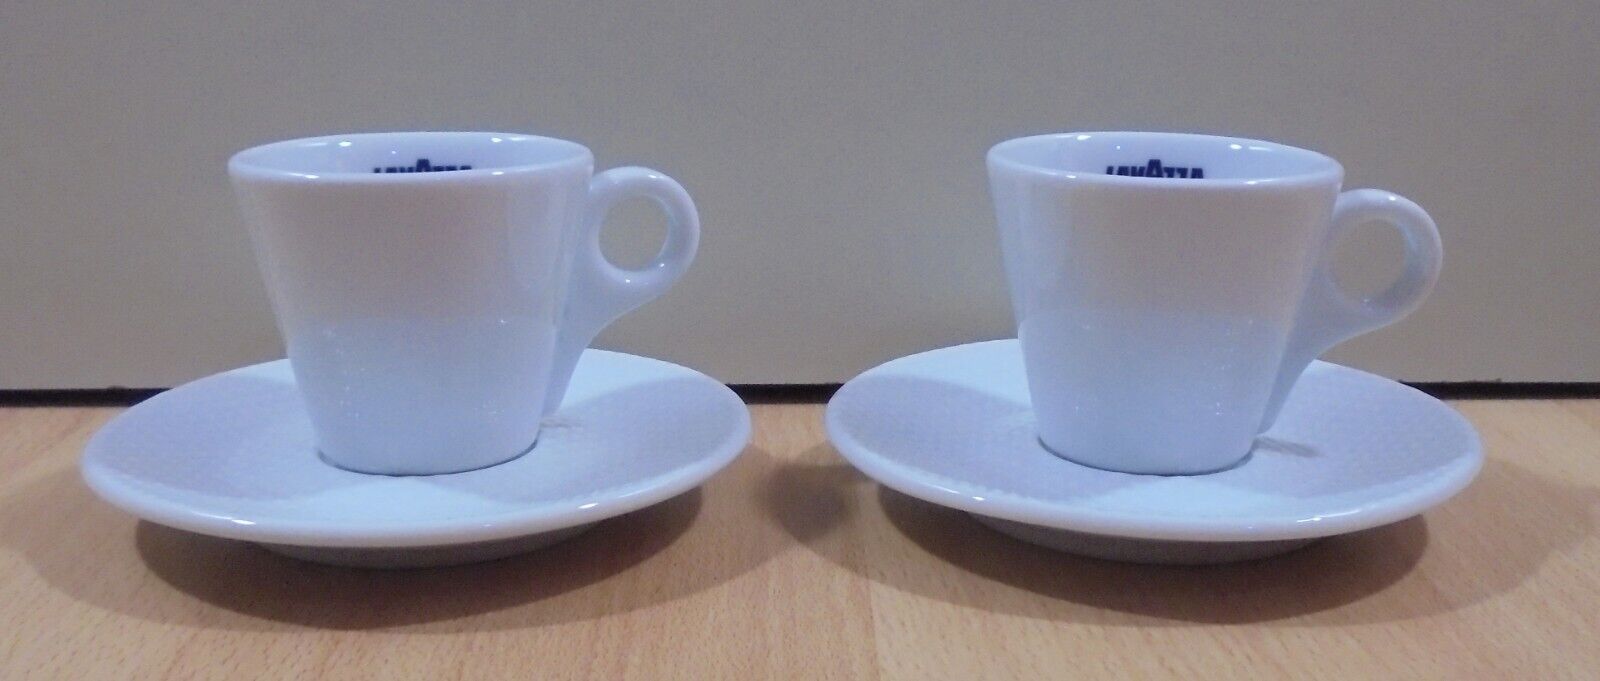 LAVAZZA ESPRESSO COFFEE ADVERTISIGN SET OF TWO CERAMIC CUPS WITH SAUCERS